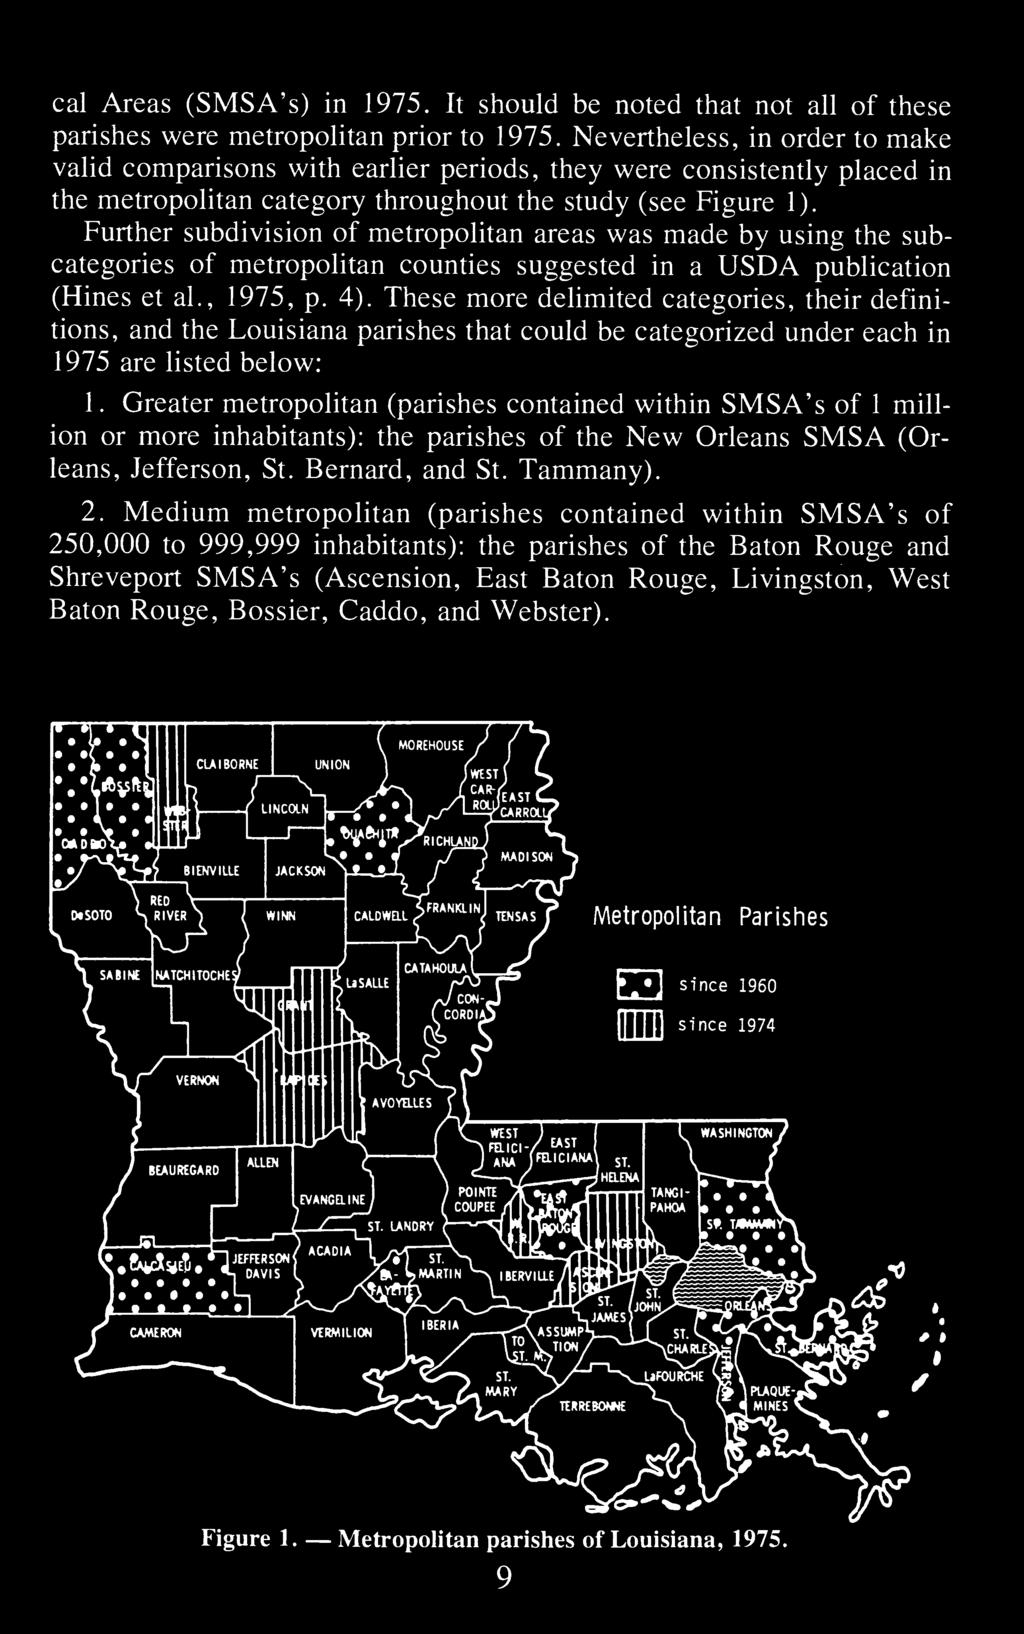 Further subdivision of metropolitan areas was made by using the subcategories of metropolitan counties suggested in a USDA publication (Hines et al., 1975, p. 4).